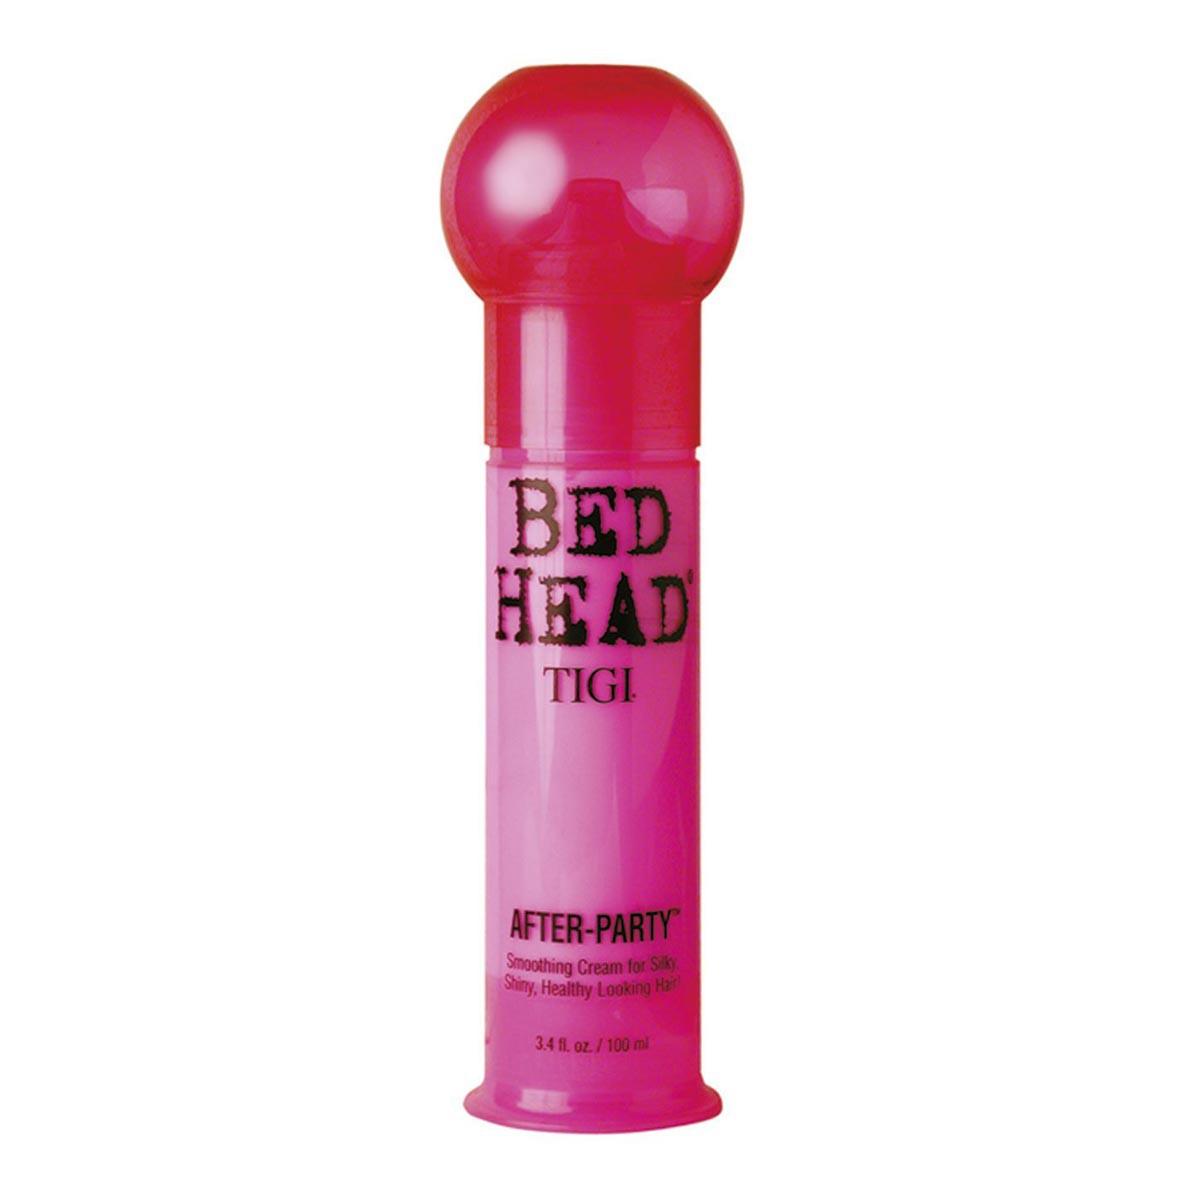 tigi-bed-head-after-party-smoothing-for-silky-hair-100ml-cream